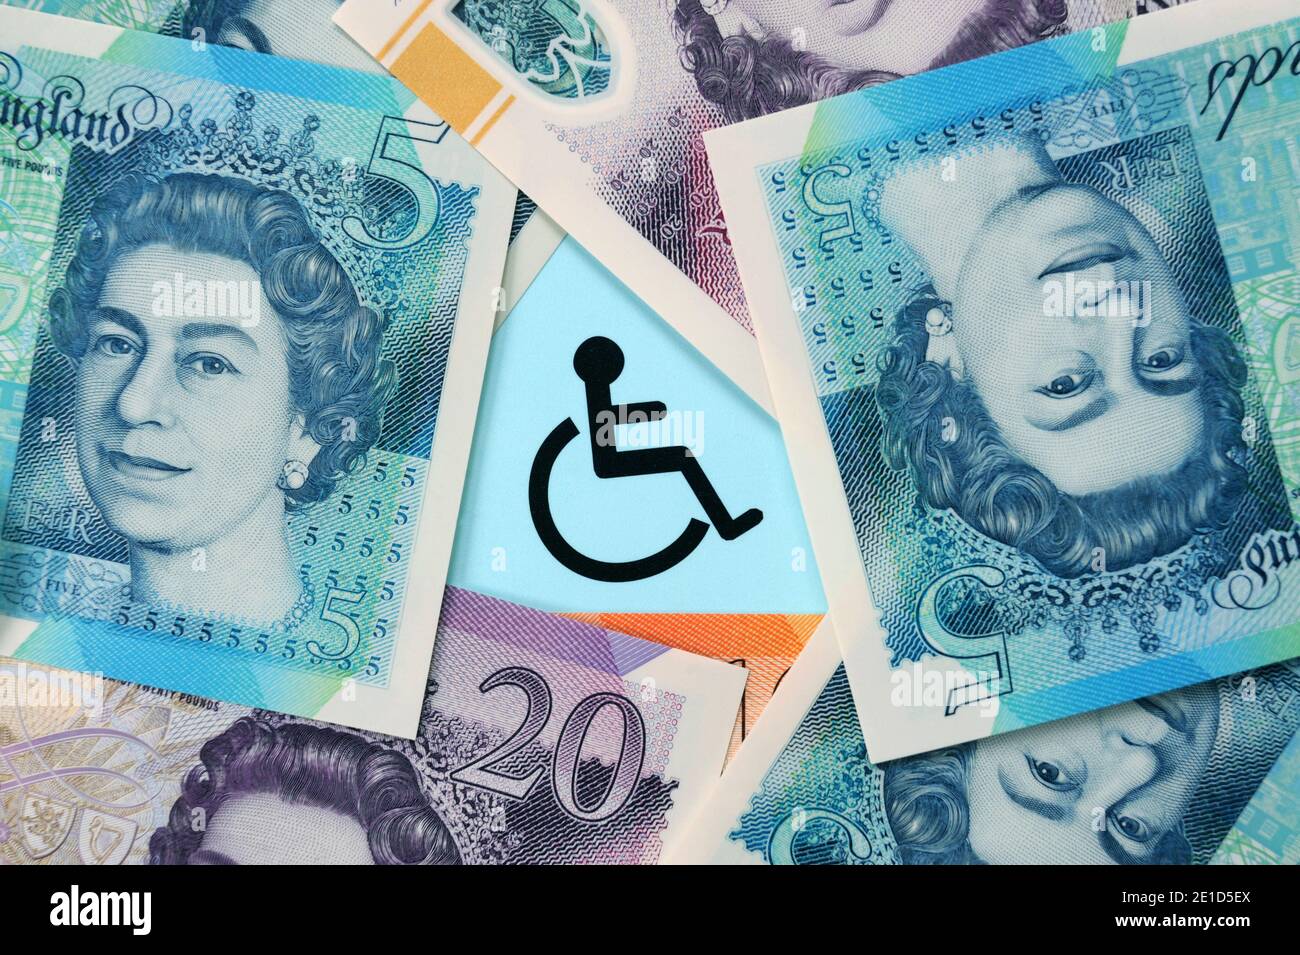 DISABLED LOGO WITH BRITISH CURRENCY RE DISABILITY BENEFITS INCOME INEQUALITY DISCRIMINATION ETC UK Stock Photo